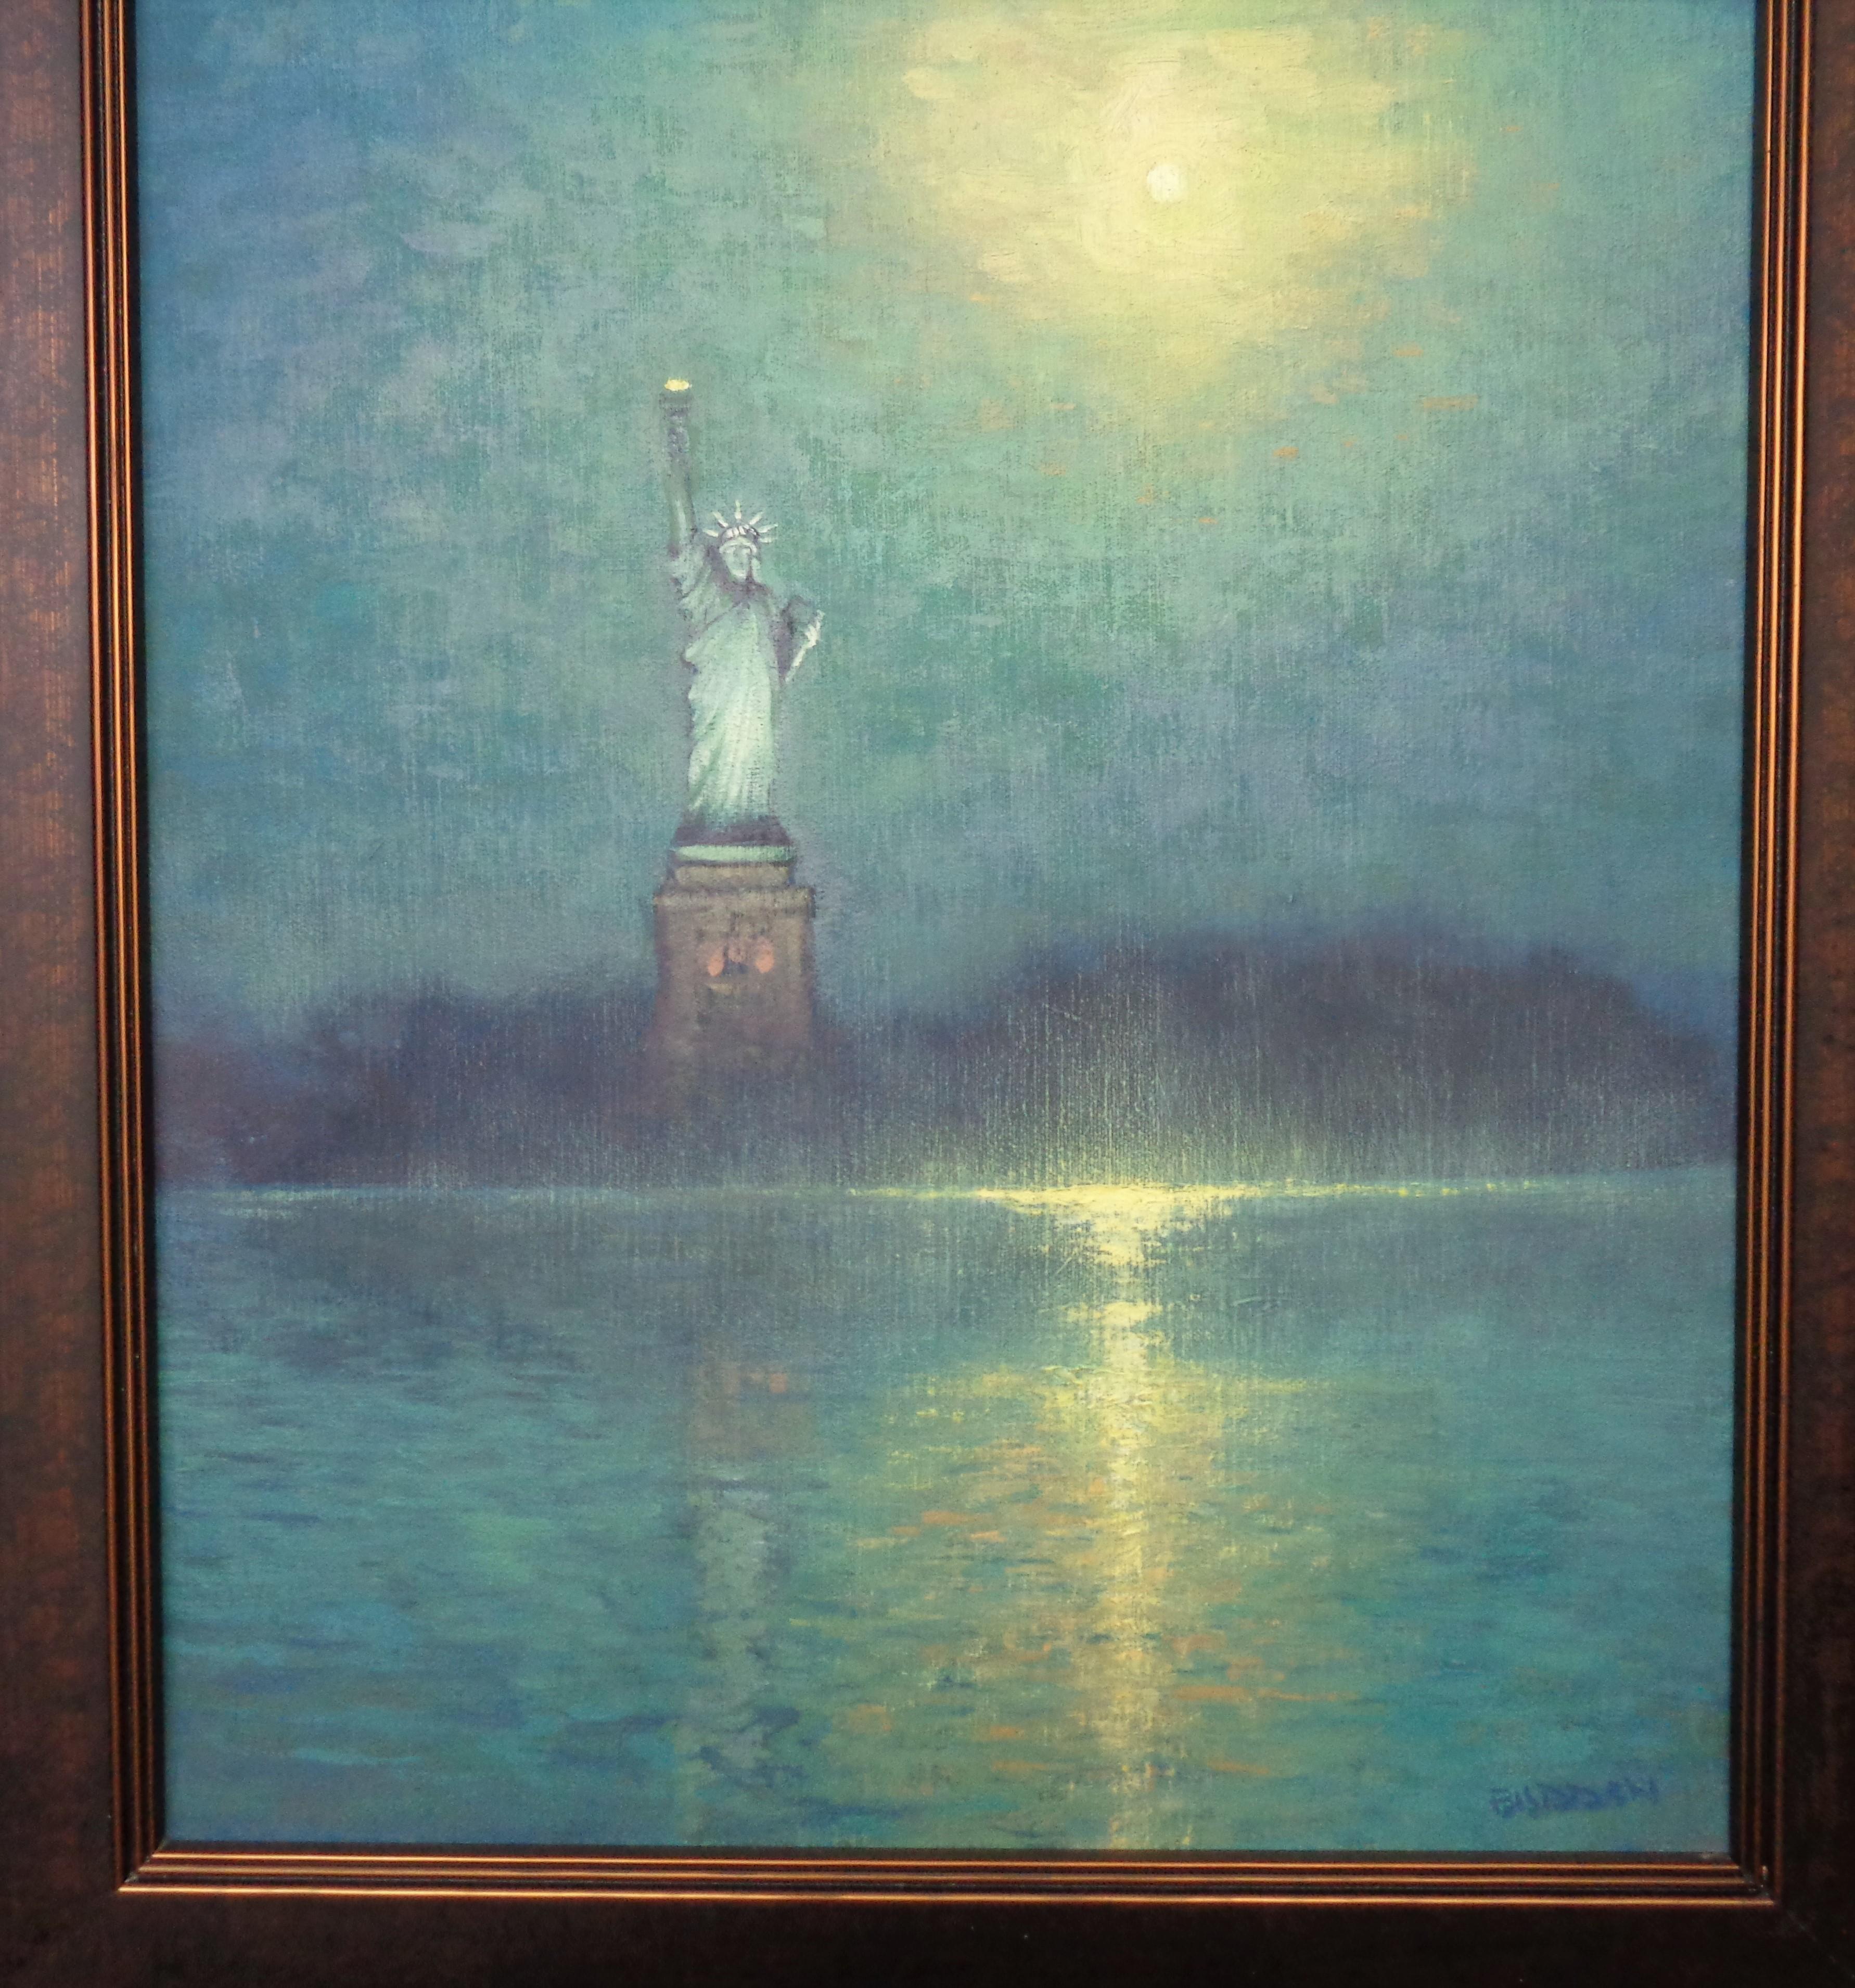 Beacons of the Night Statue of Liberty is an oil painting on canvas by award winning contemporary artist Michael Budden that showcases the great statue on a moonlit night that represents the freedom and hope sought out by so many of our ancestors